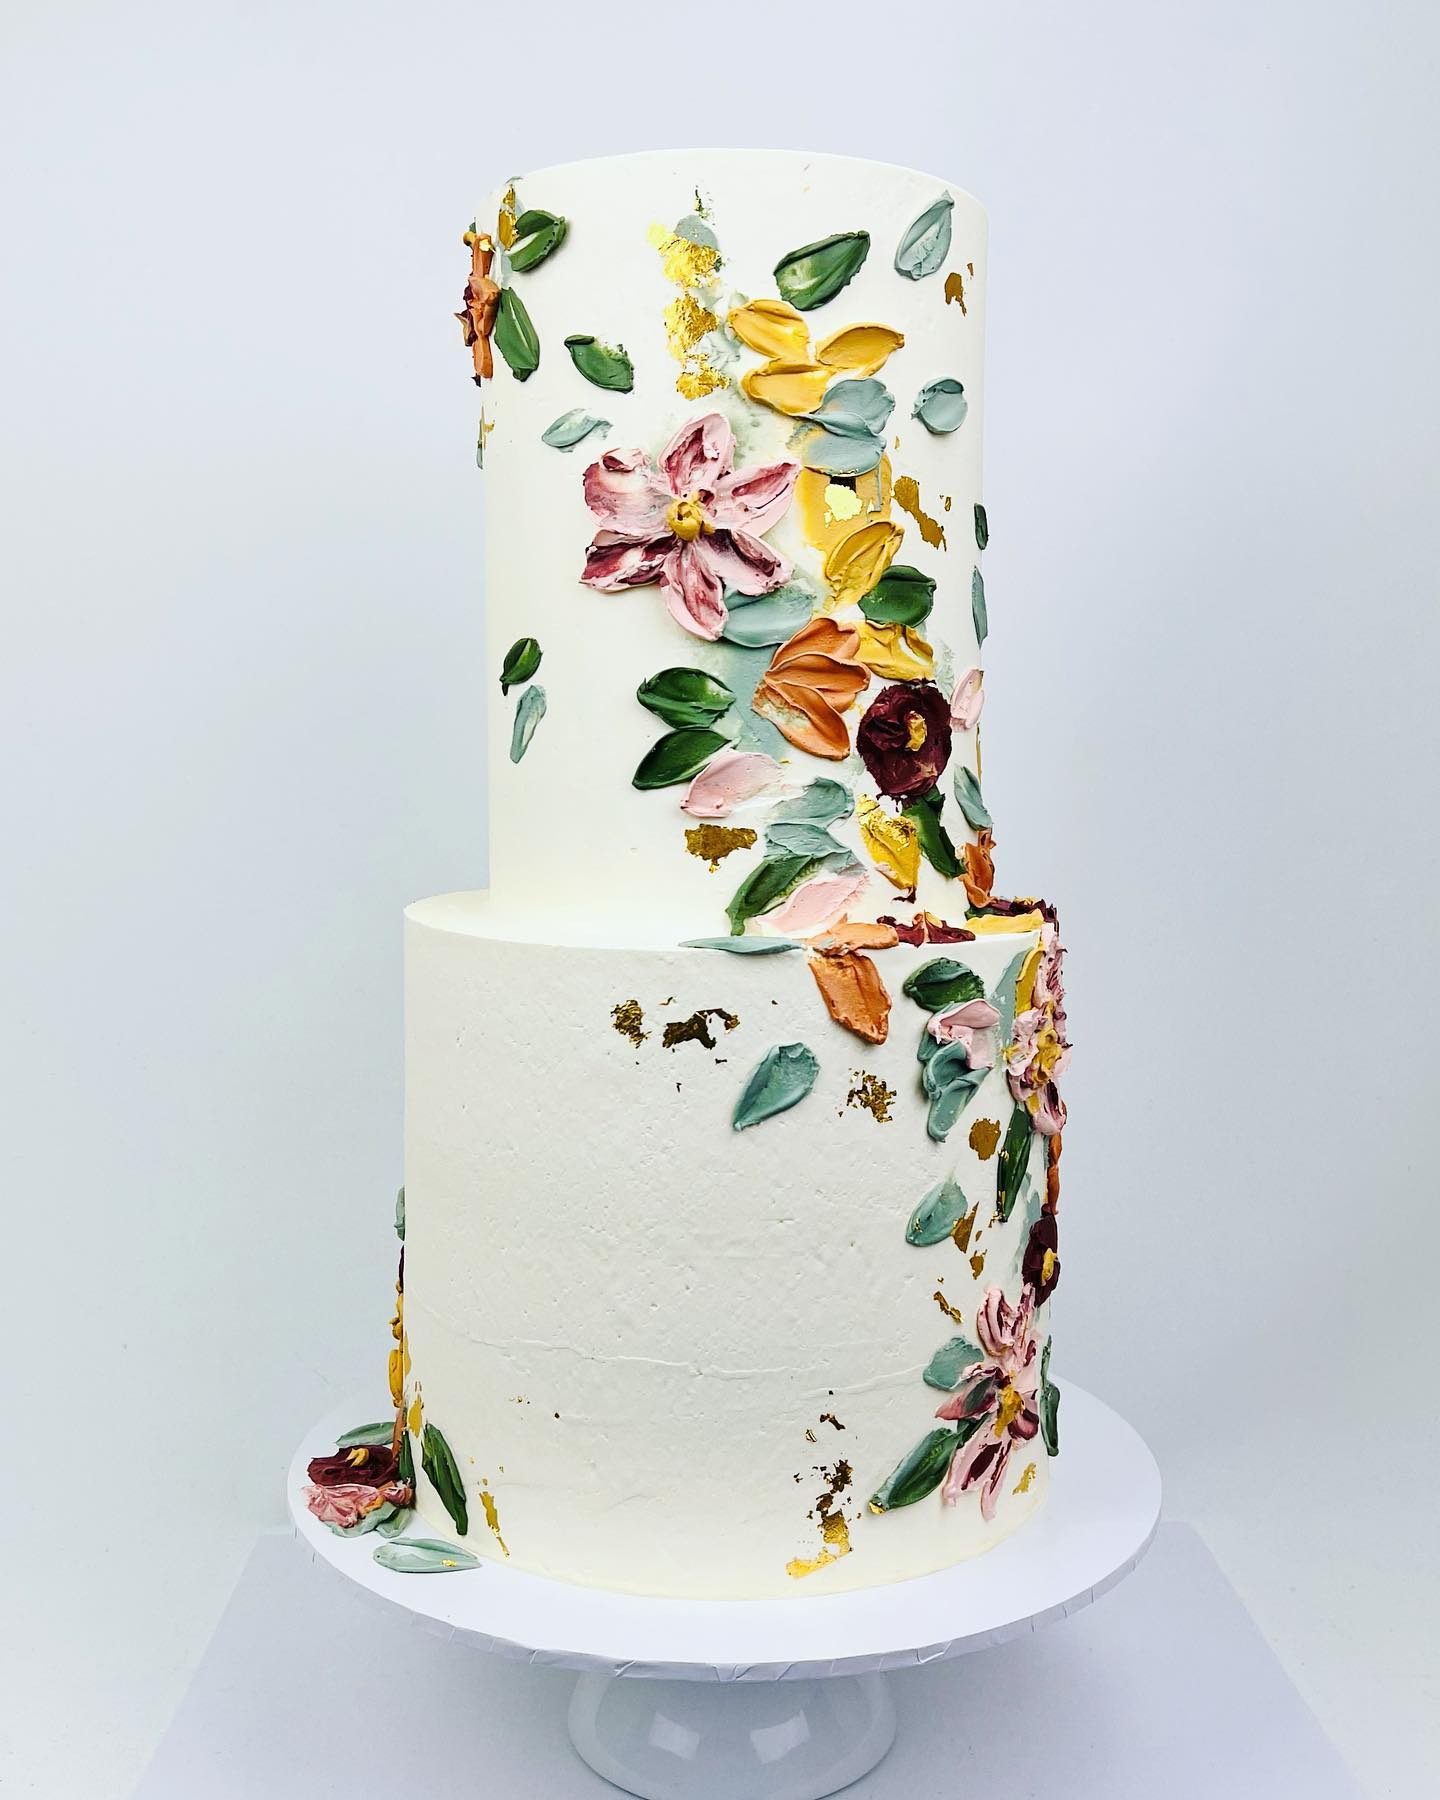 Wedding cake trends we're loving painted florals